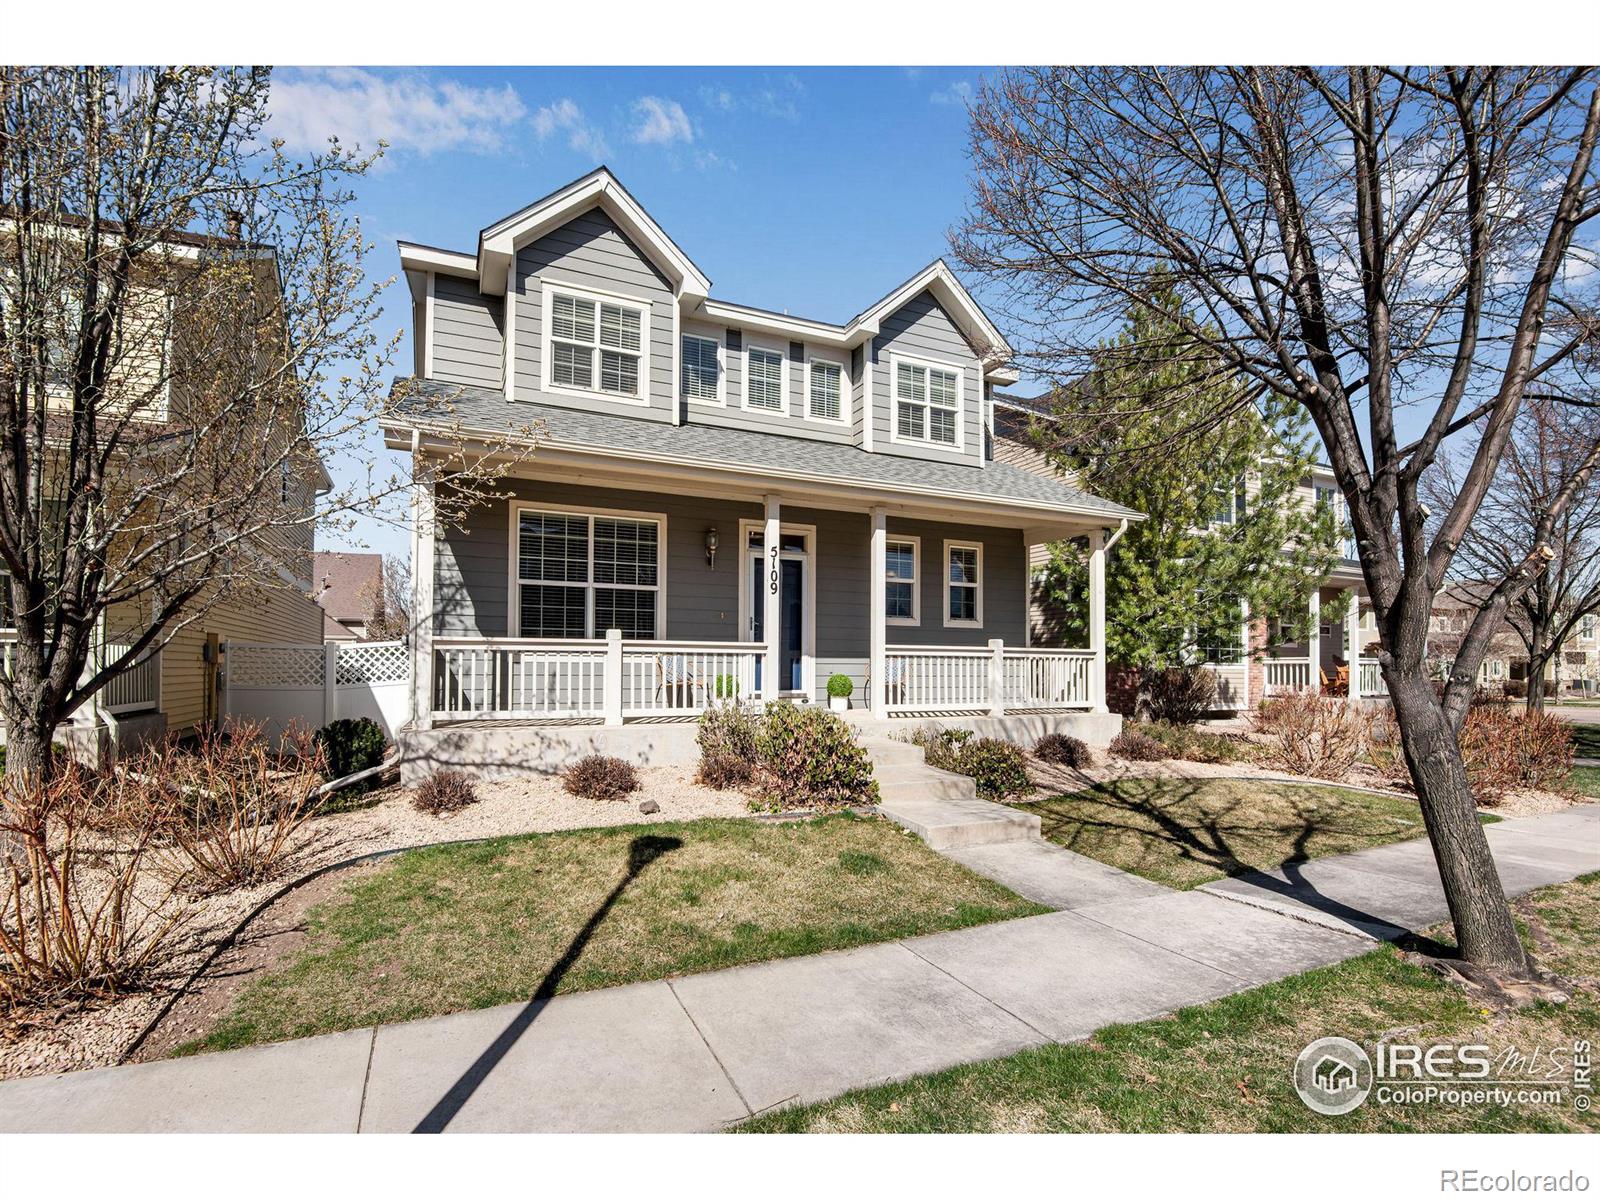 5109  Southern Cross Lane, fort collins MLS: 4567891007018 Beds: 4 Baths: 4 Price: $622,000